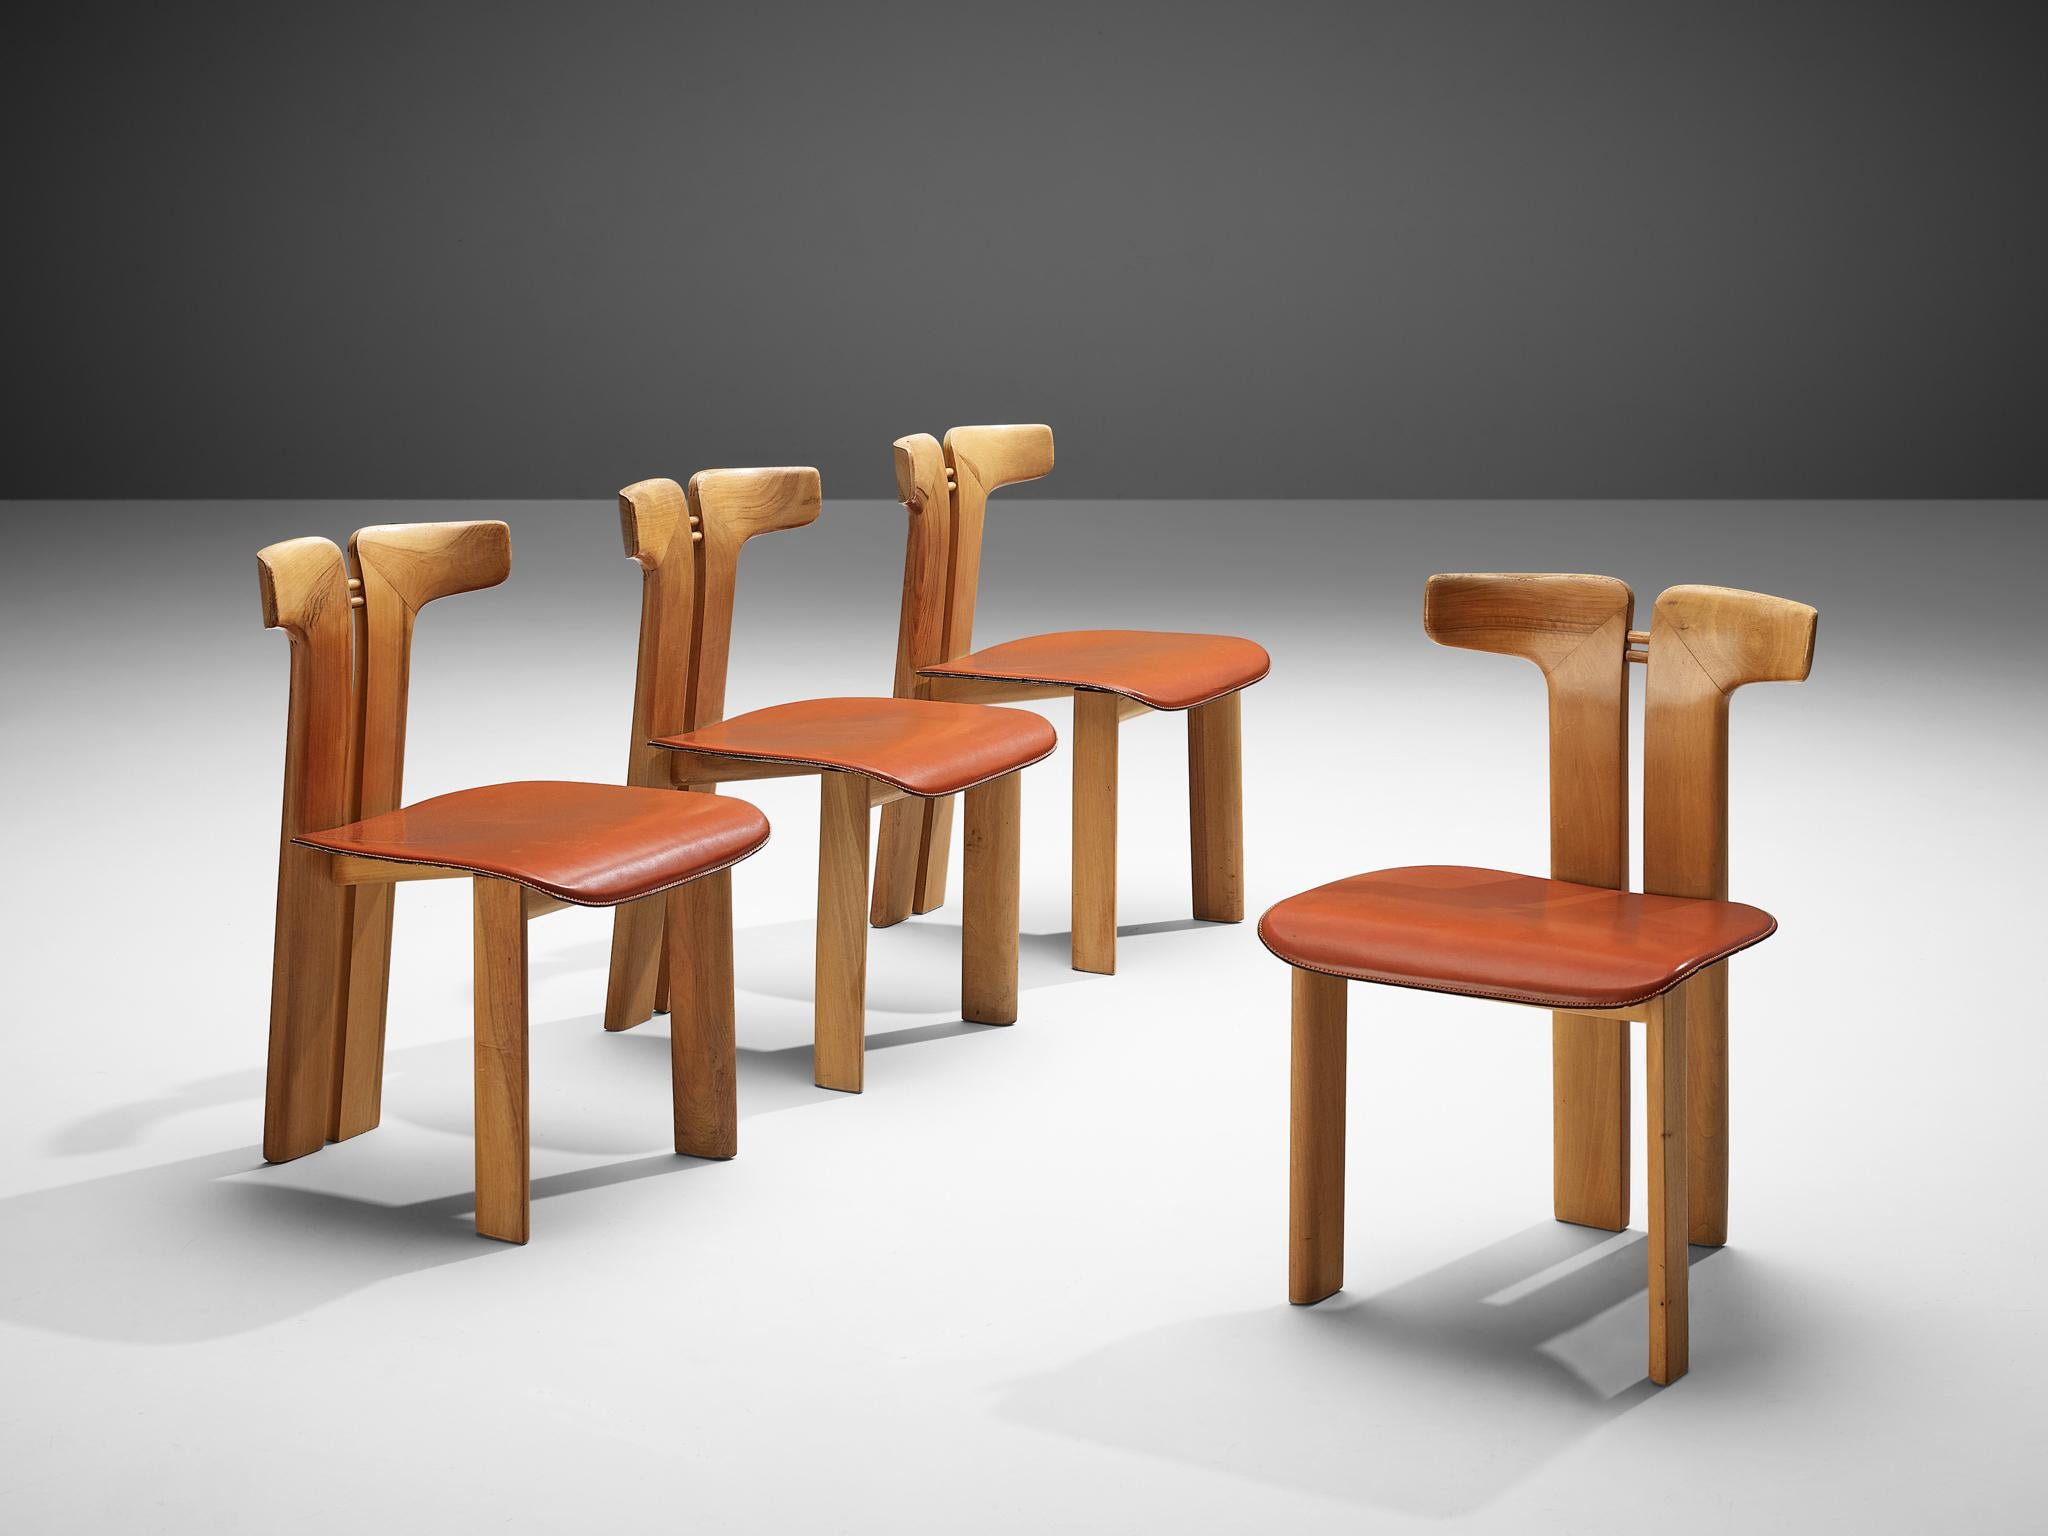 Pierre Cardin, set of four dining chairs, walnut and cognac leather, Italy, 1980s 

This set of sculptural chairs is designed by Pierre Cardin. The curved back highlights the qualities of the wood and its shape in an unparalleled manner. These